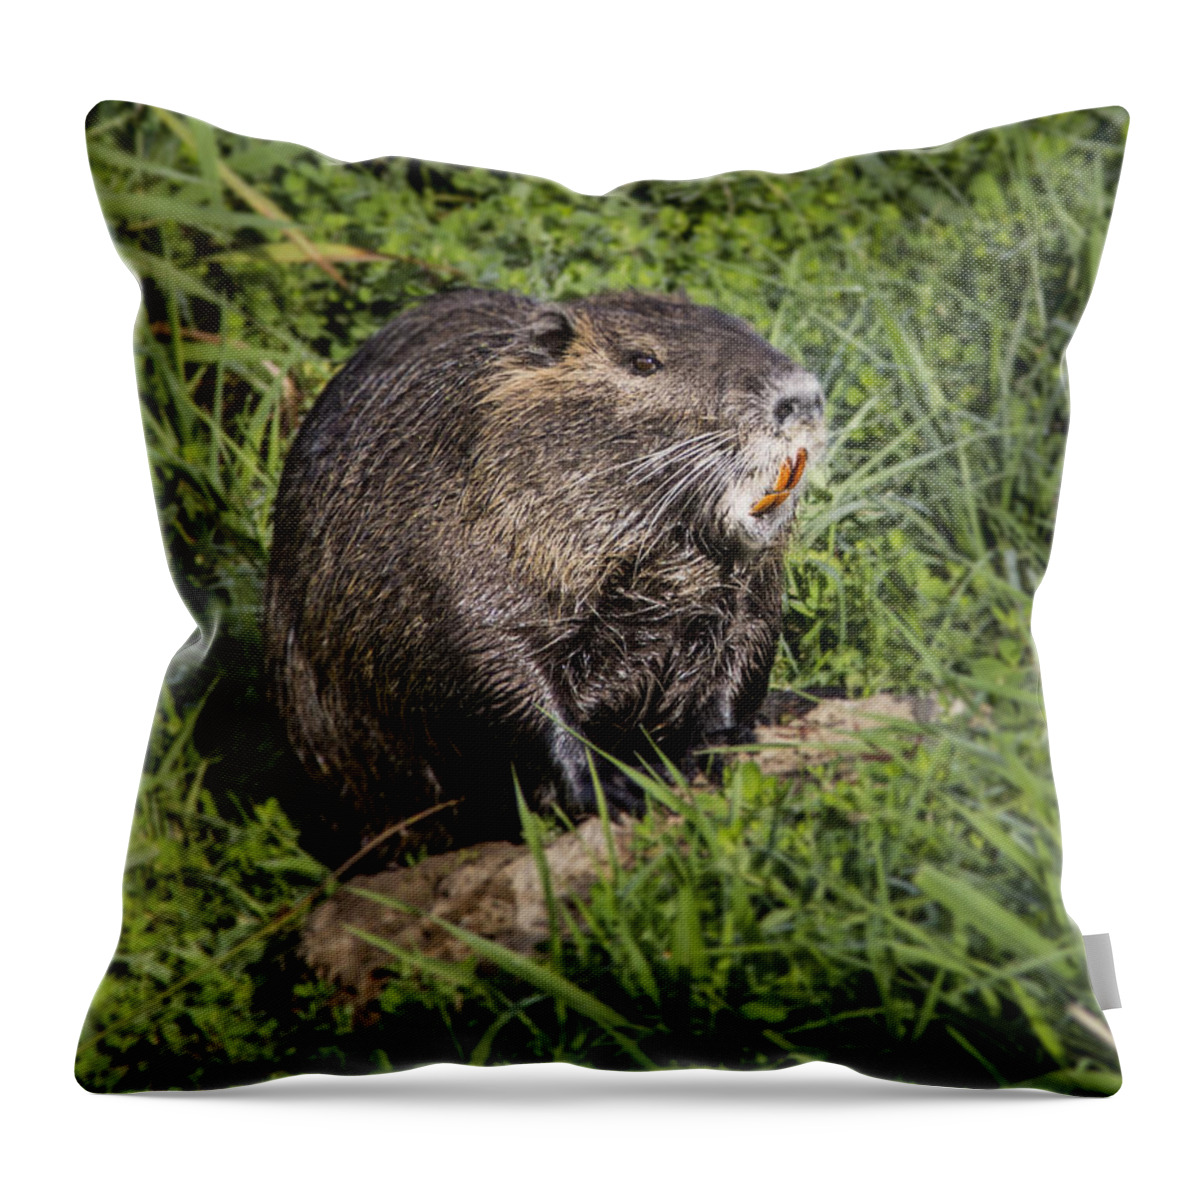 Jean Noren Throw Pillow featuring the photograph A Toothy Nutria by Jean Noren